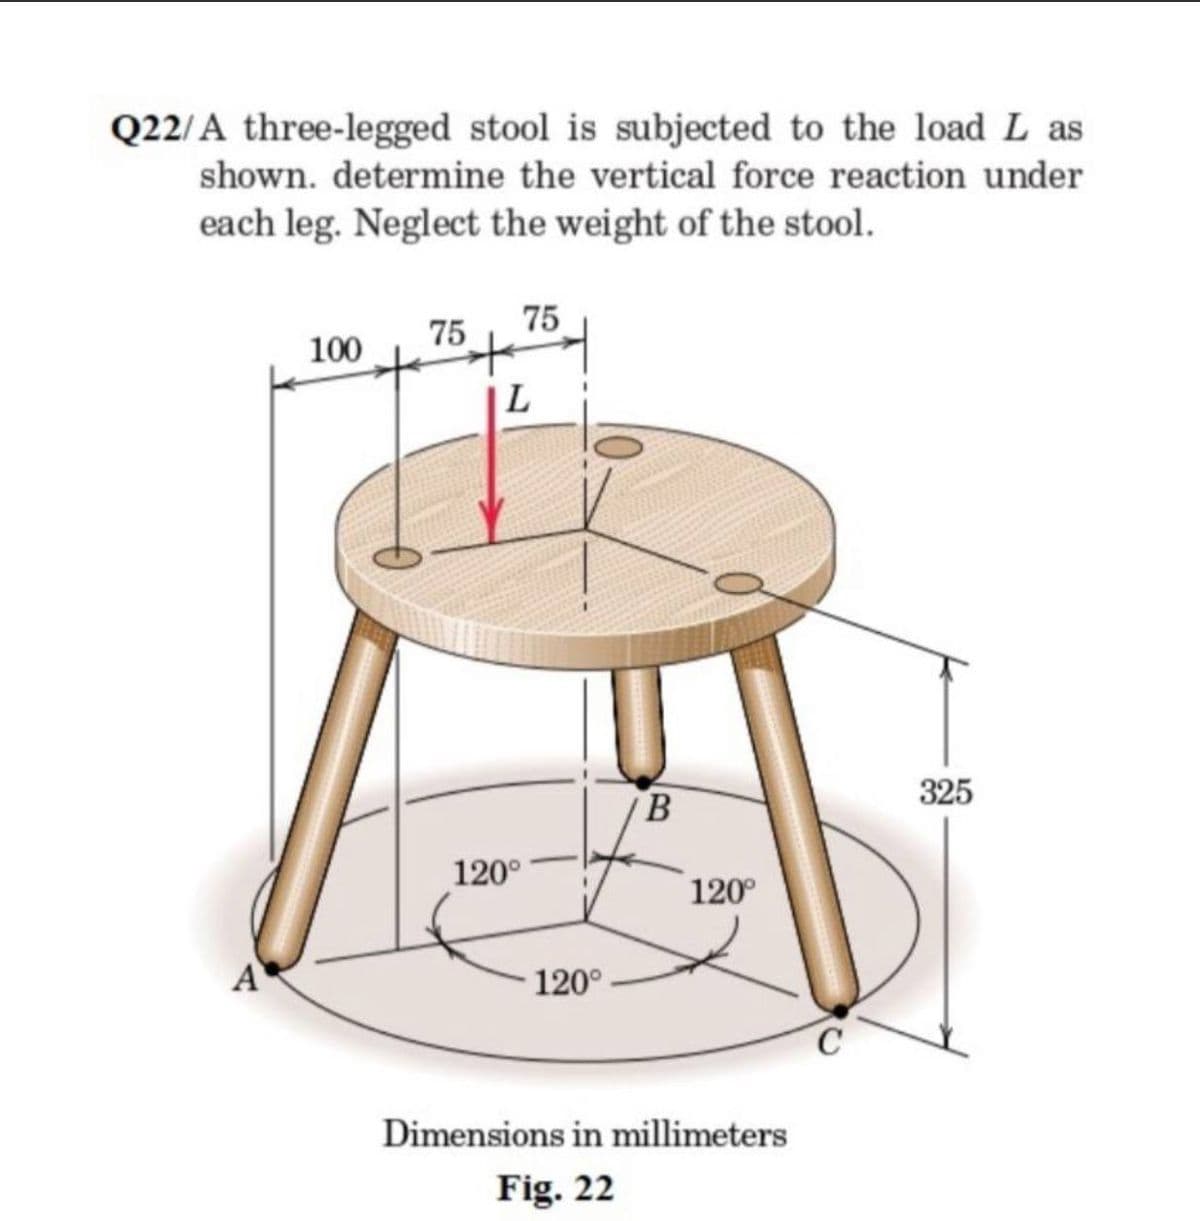 Q22/A three-legged stool is subjected to the load L as
shown. determine the vertical force reaction under
each leg. Neglect the weight of the stool.
75
75
100
L
325
120°
120°
A
120°
C
Dimensions in millimeters
Fig. 22
